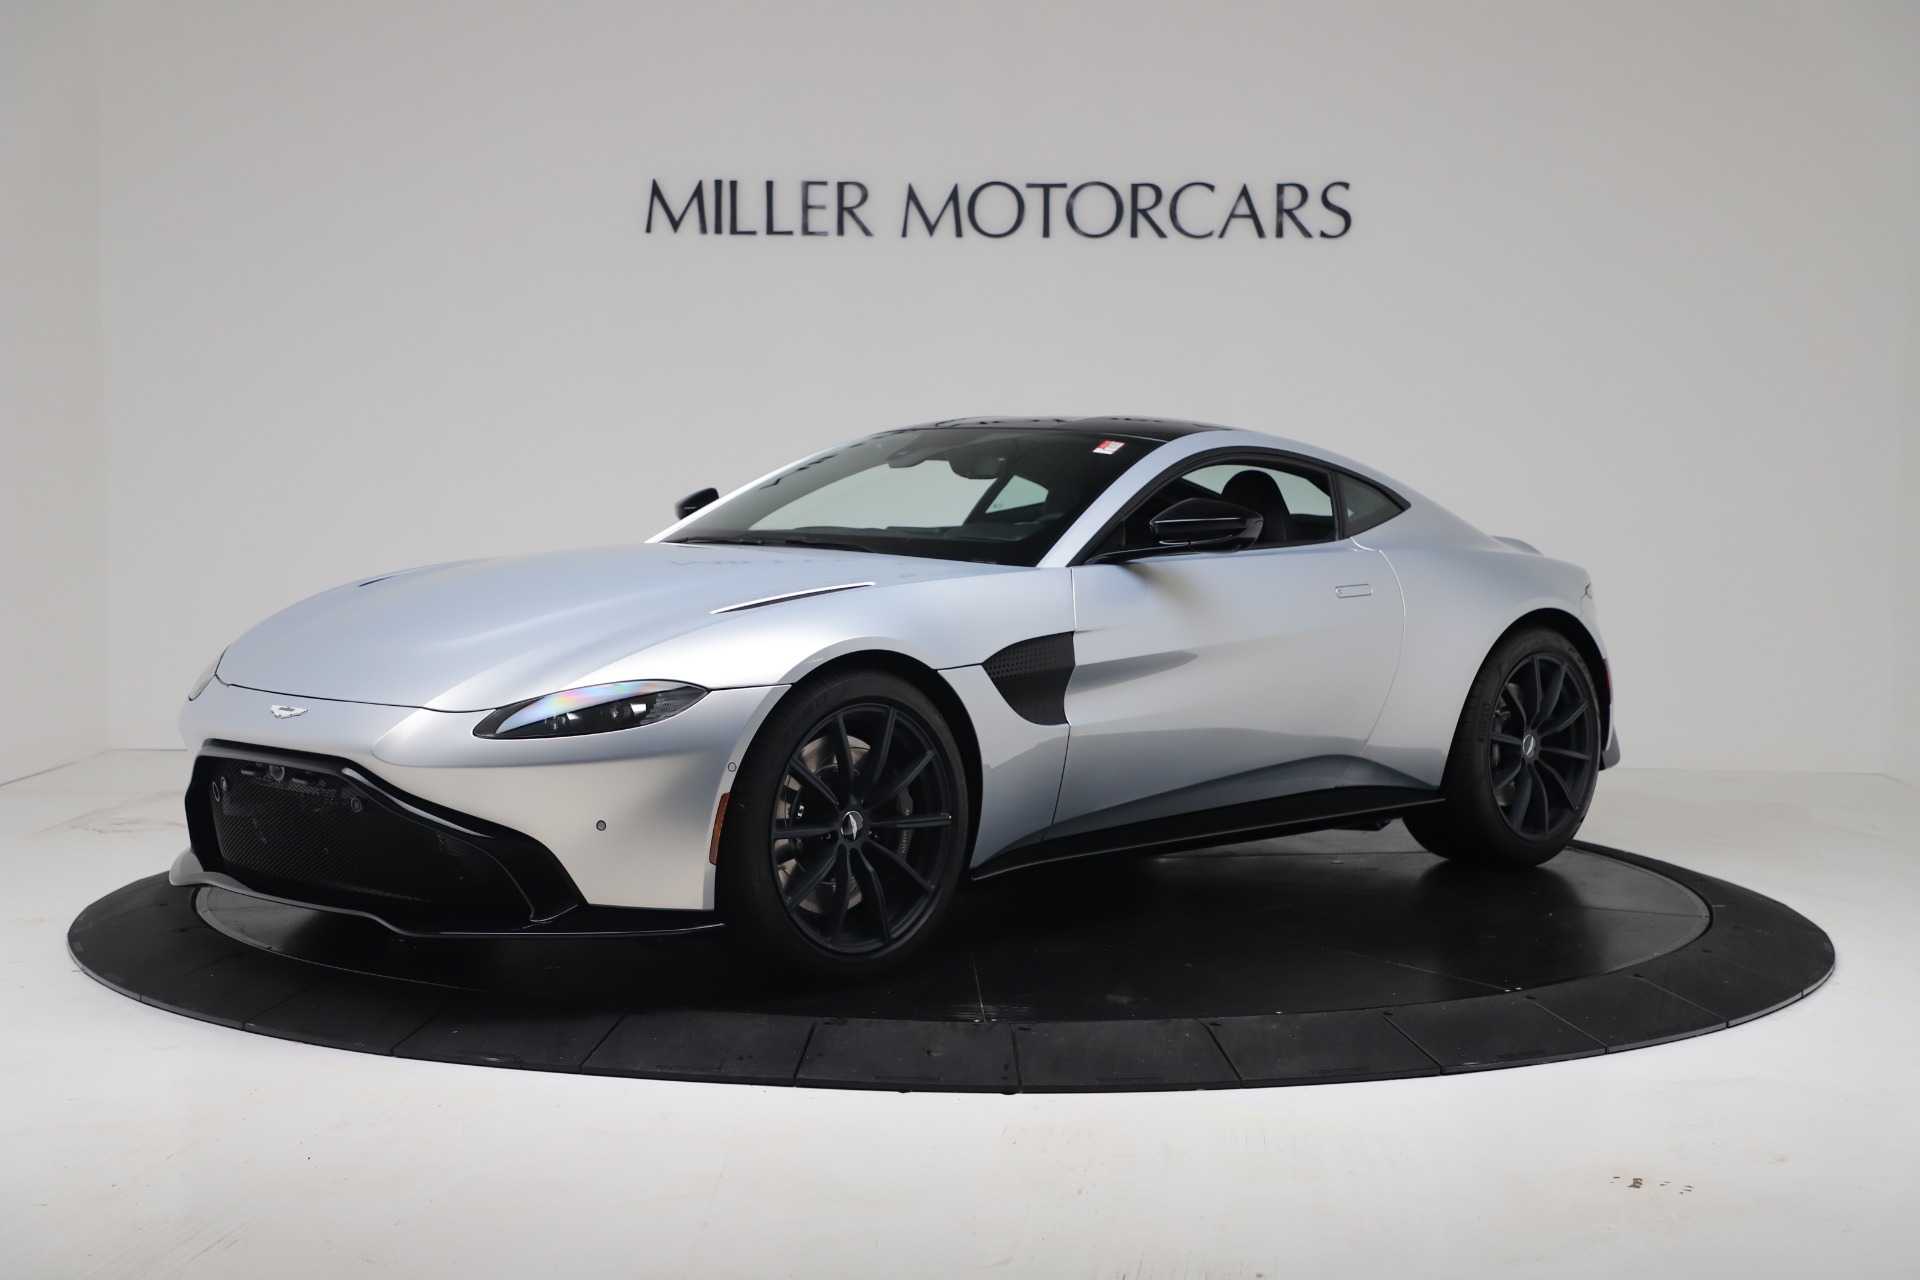 New 2020 Aston Martin Vantage Coupe for sale Sold at Rolls-Royce Motor Cars Greenwich in Greenwich CT 06830 1